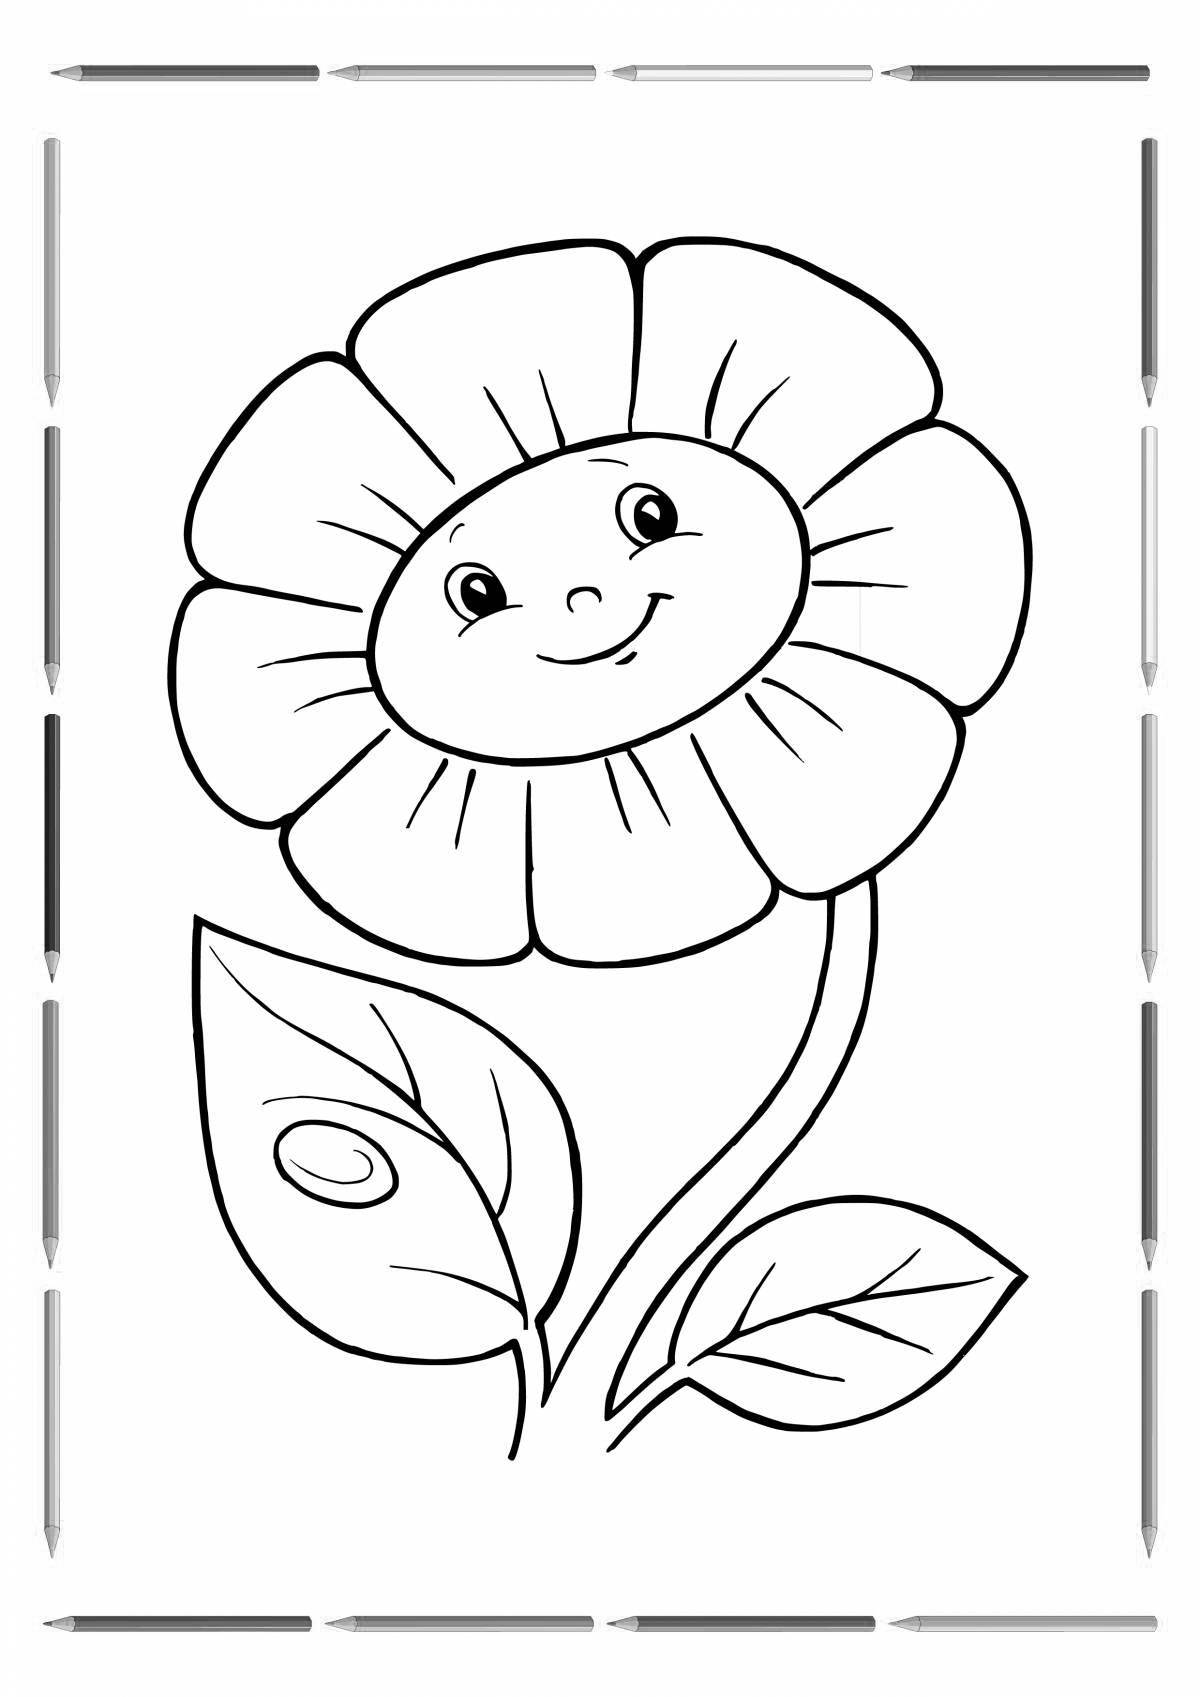 Live coloring flowers for kids